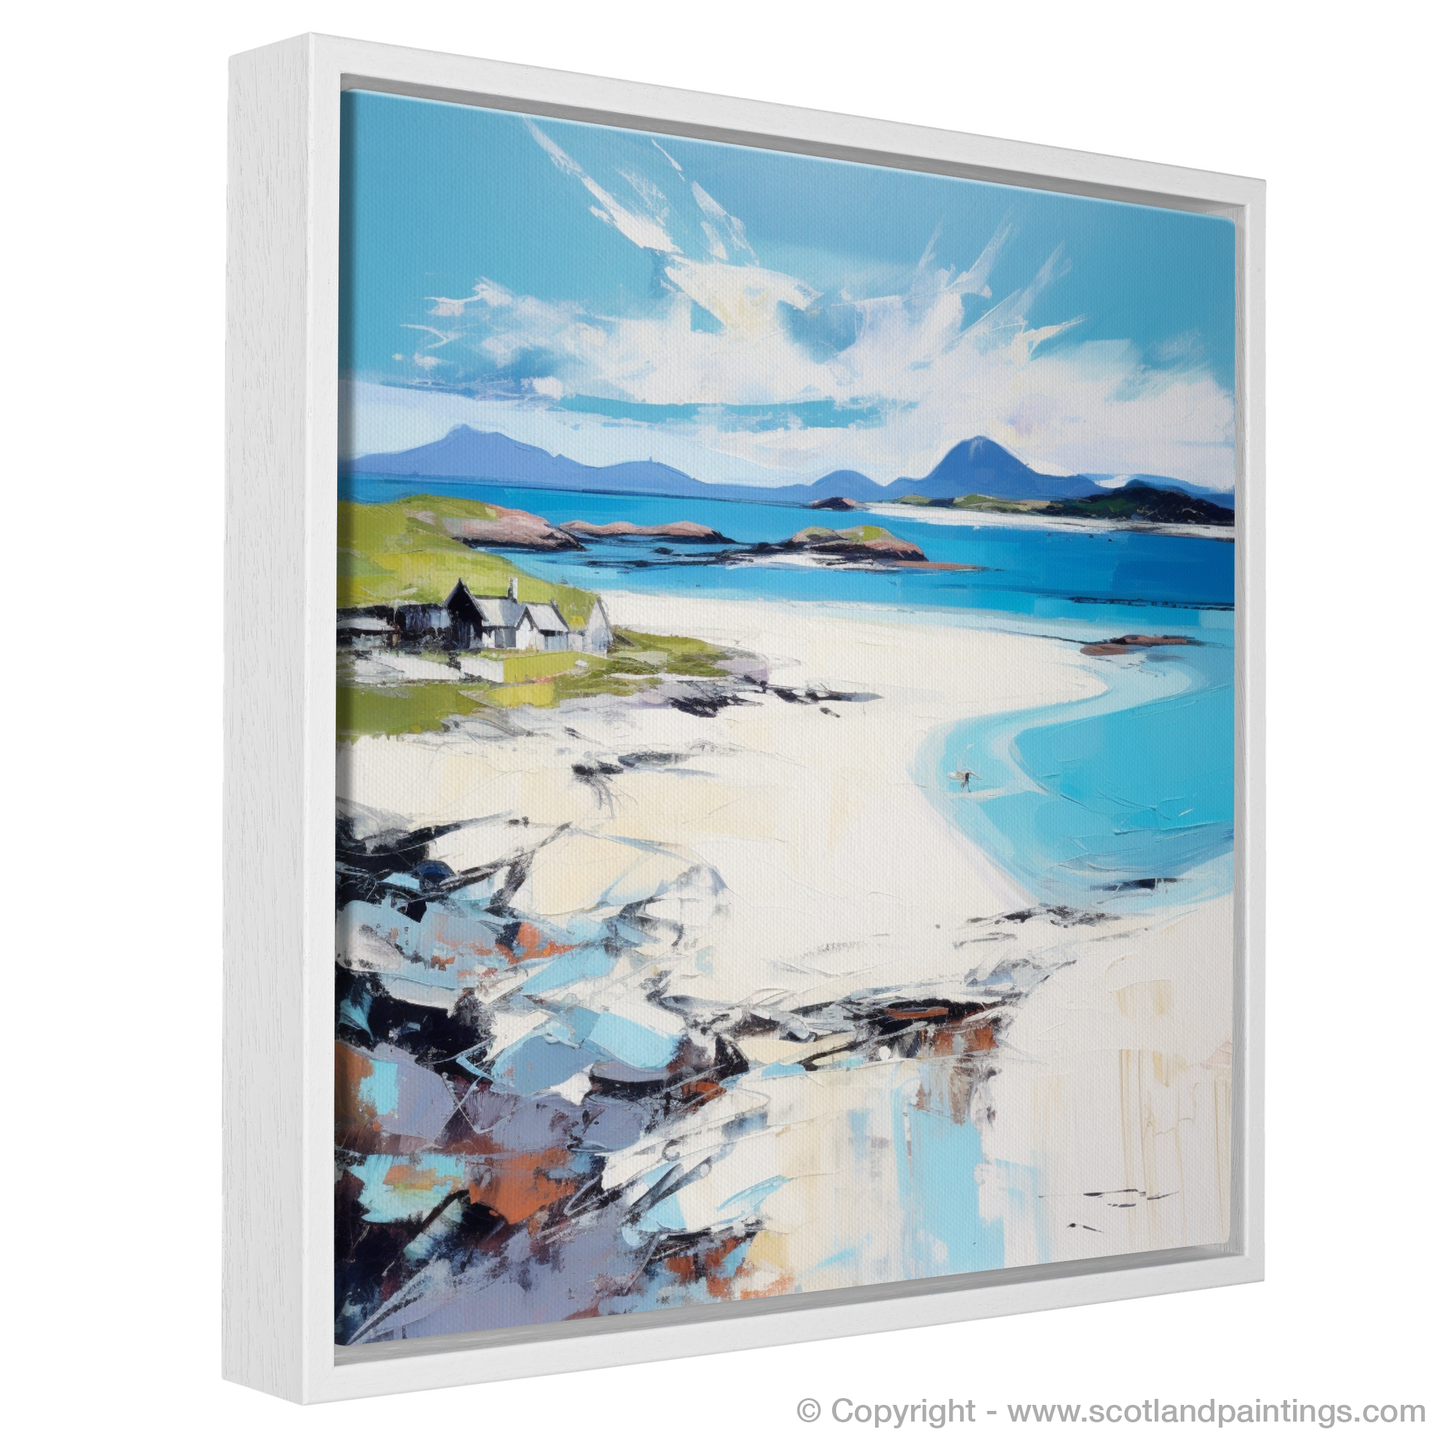 Painting and Art Print of Camusdarach Beach, Arisaig entitled "Whispers of Camusdarach: An Abstract Impressionist Ode to the Scottish Coast".